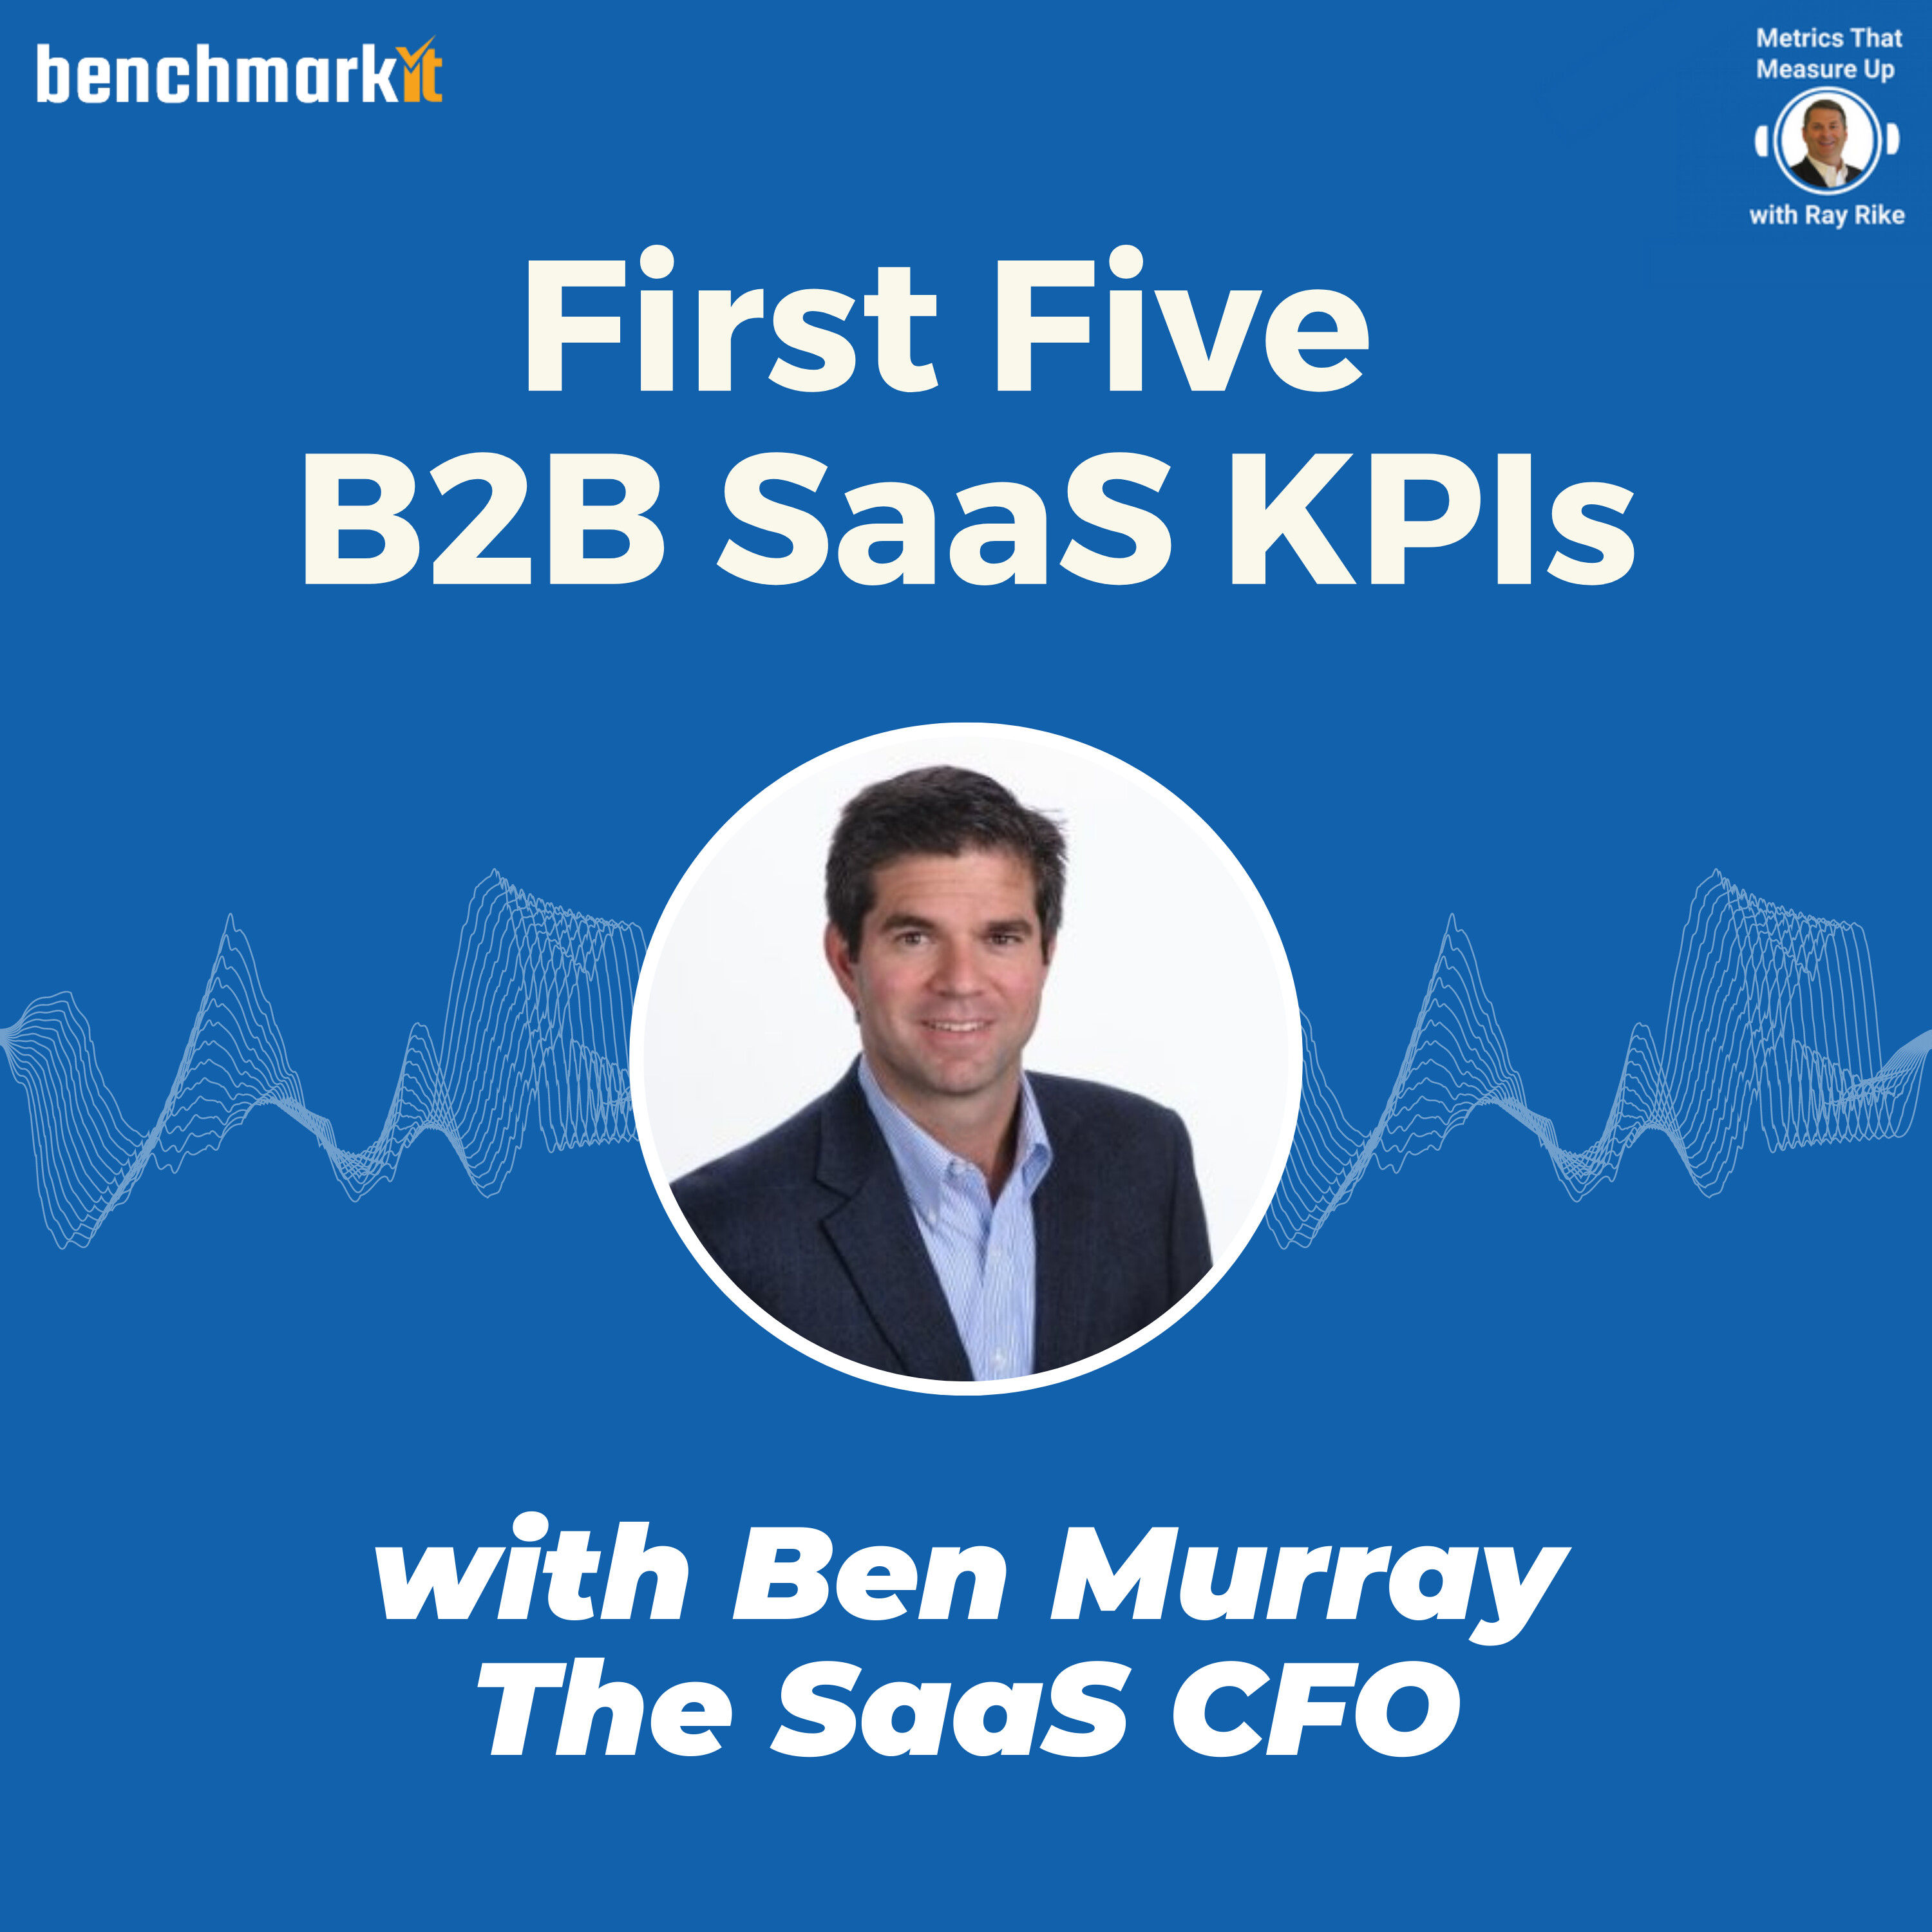 The SaaS CFO - First Five KPIs - with Ben Murray